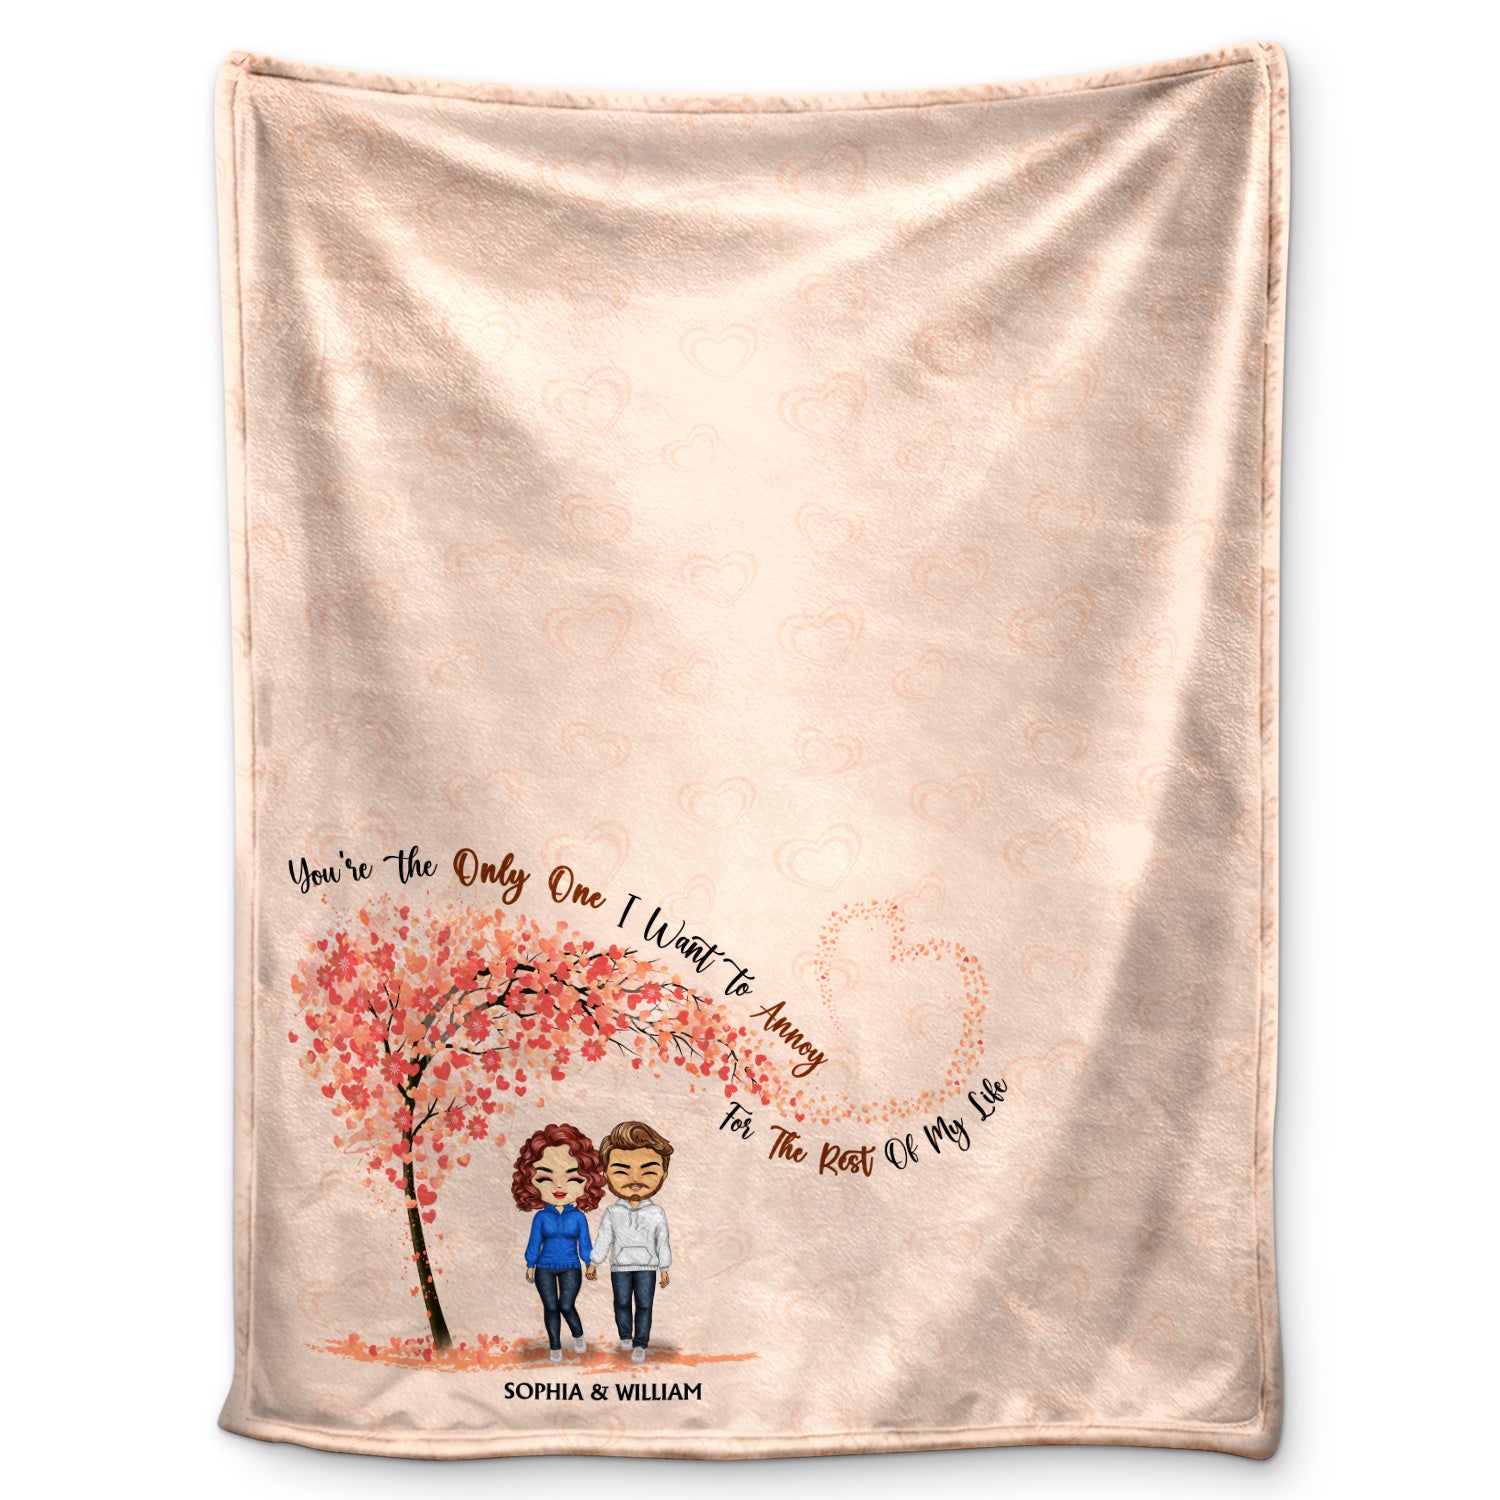 Annoy For The Rest Of My Life - Anniversary, Birthday Gift For Spouse, Lover, Husband, Wife, Boyfriend, Girlfriend, Couple - Personalized Custom Fleece Blanket